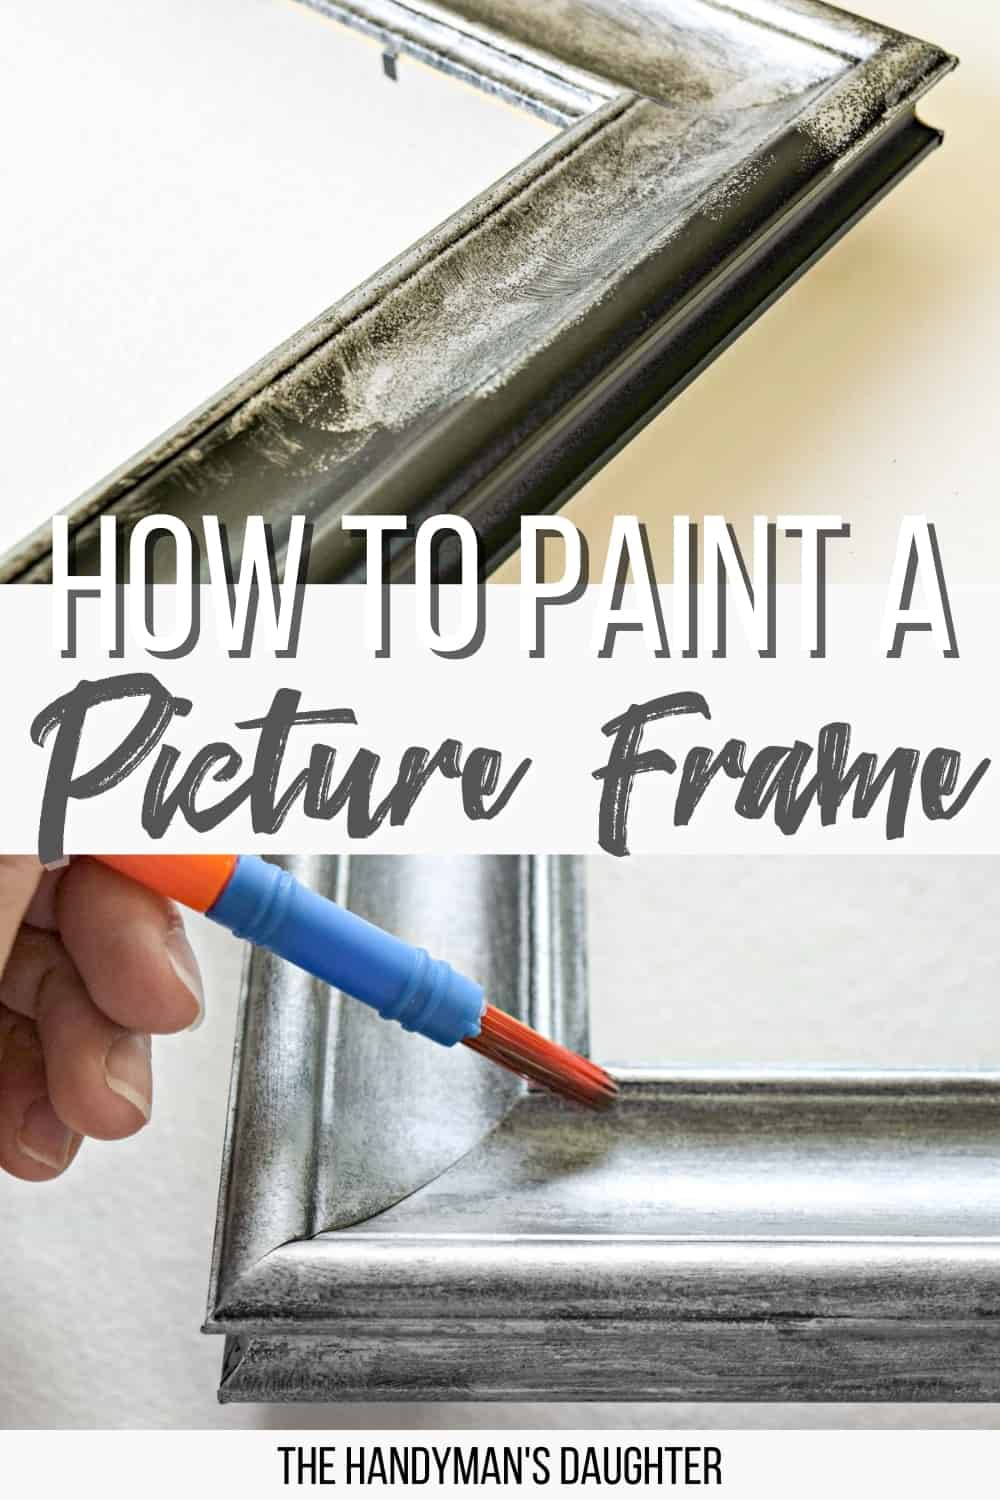 How to paint a picture frame